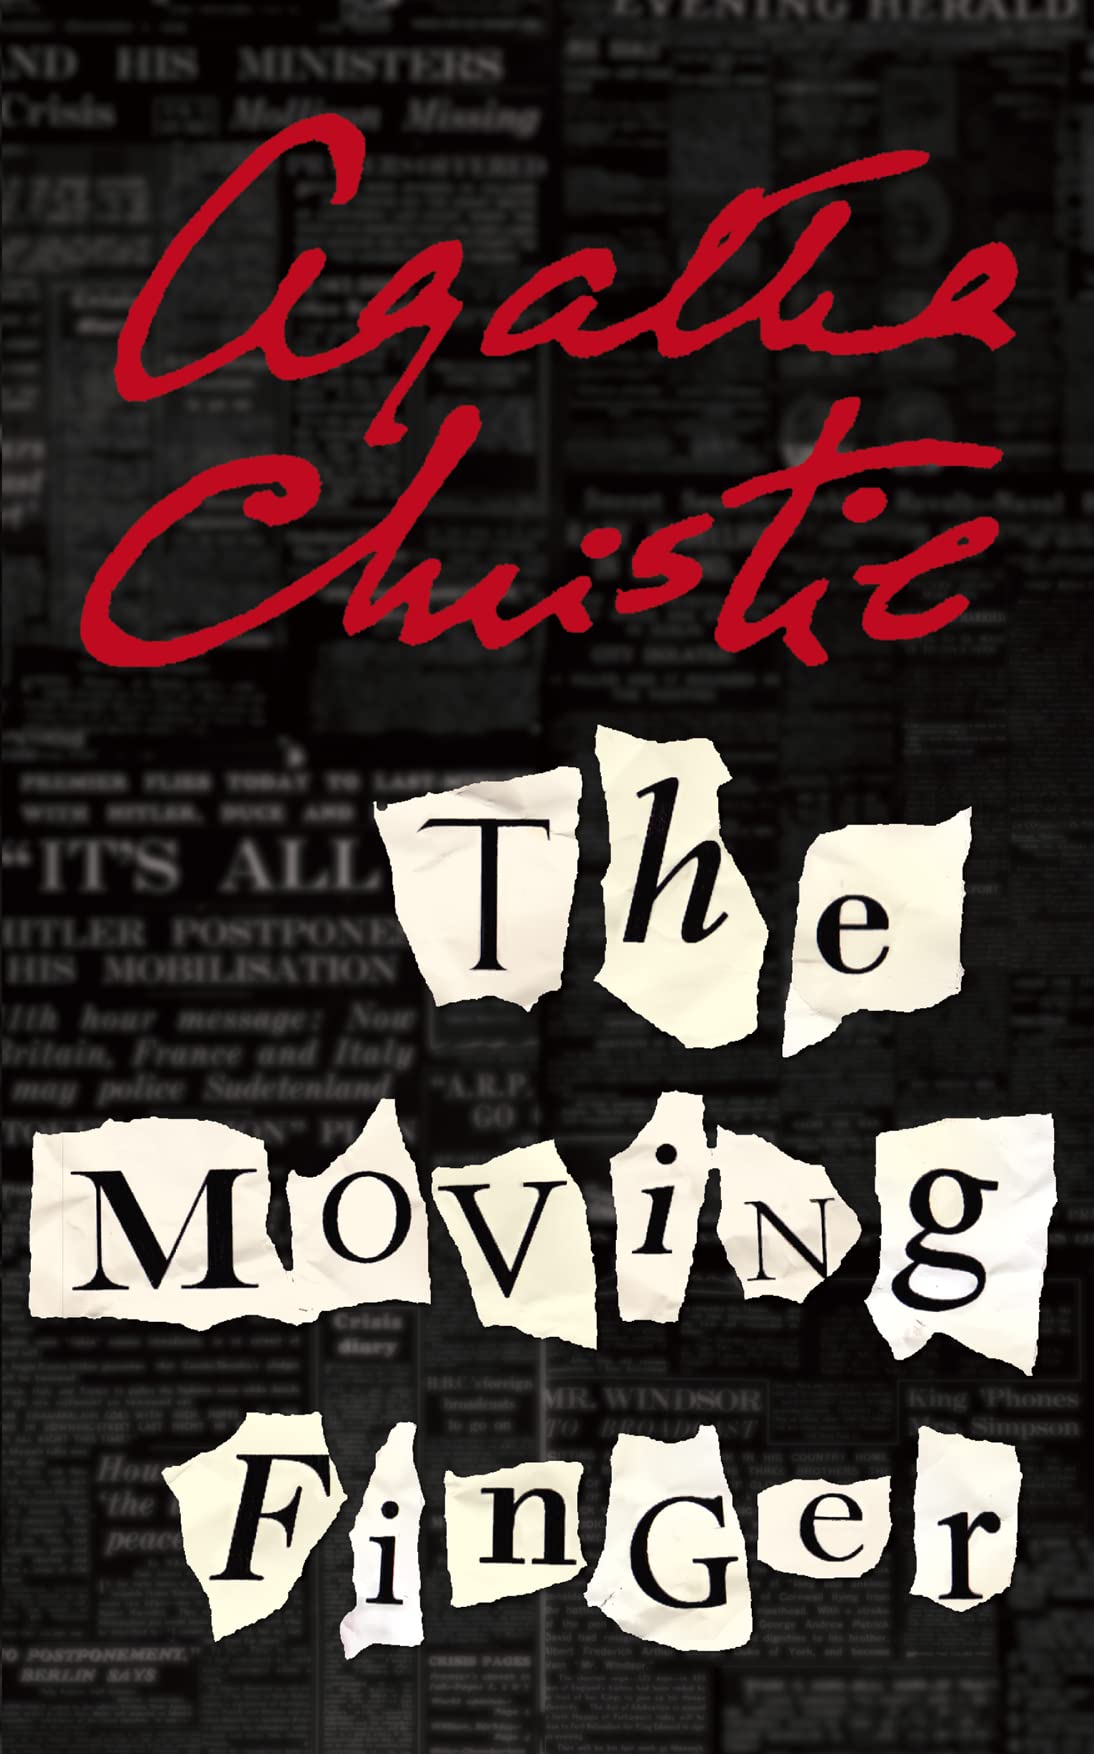 1088-the-moving-finger-1942-by-agatha-christie-the-invisible-event